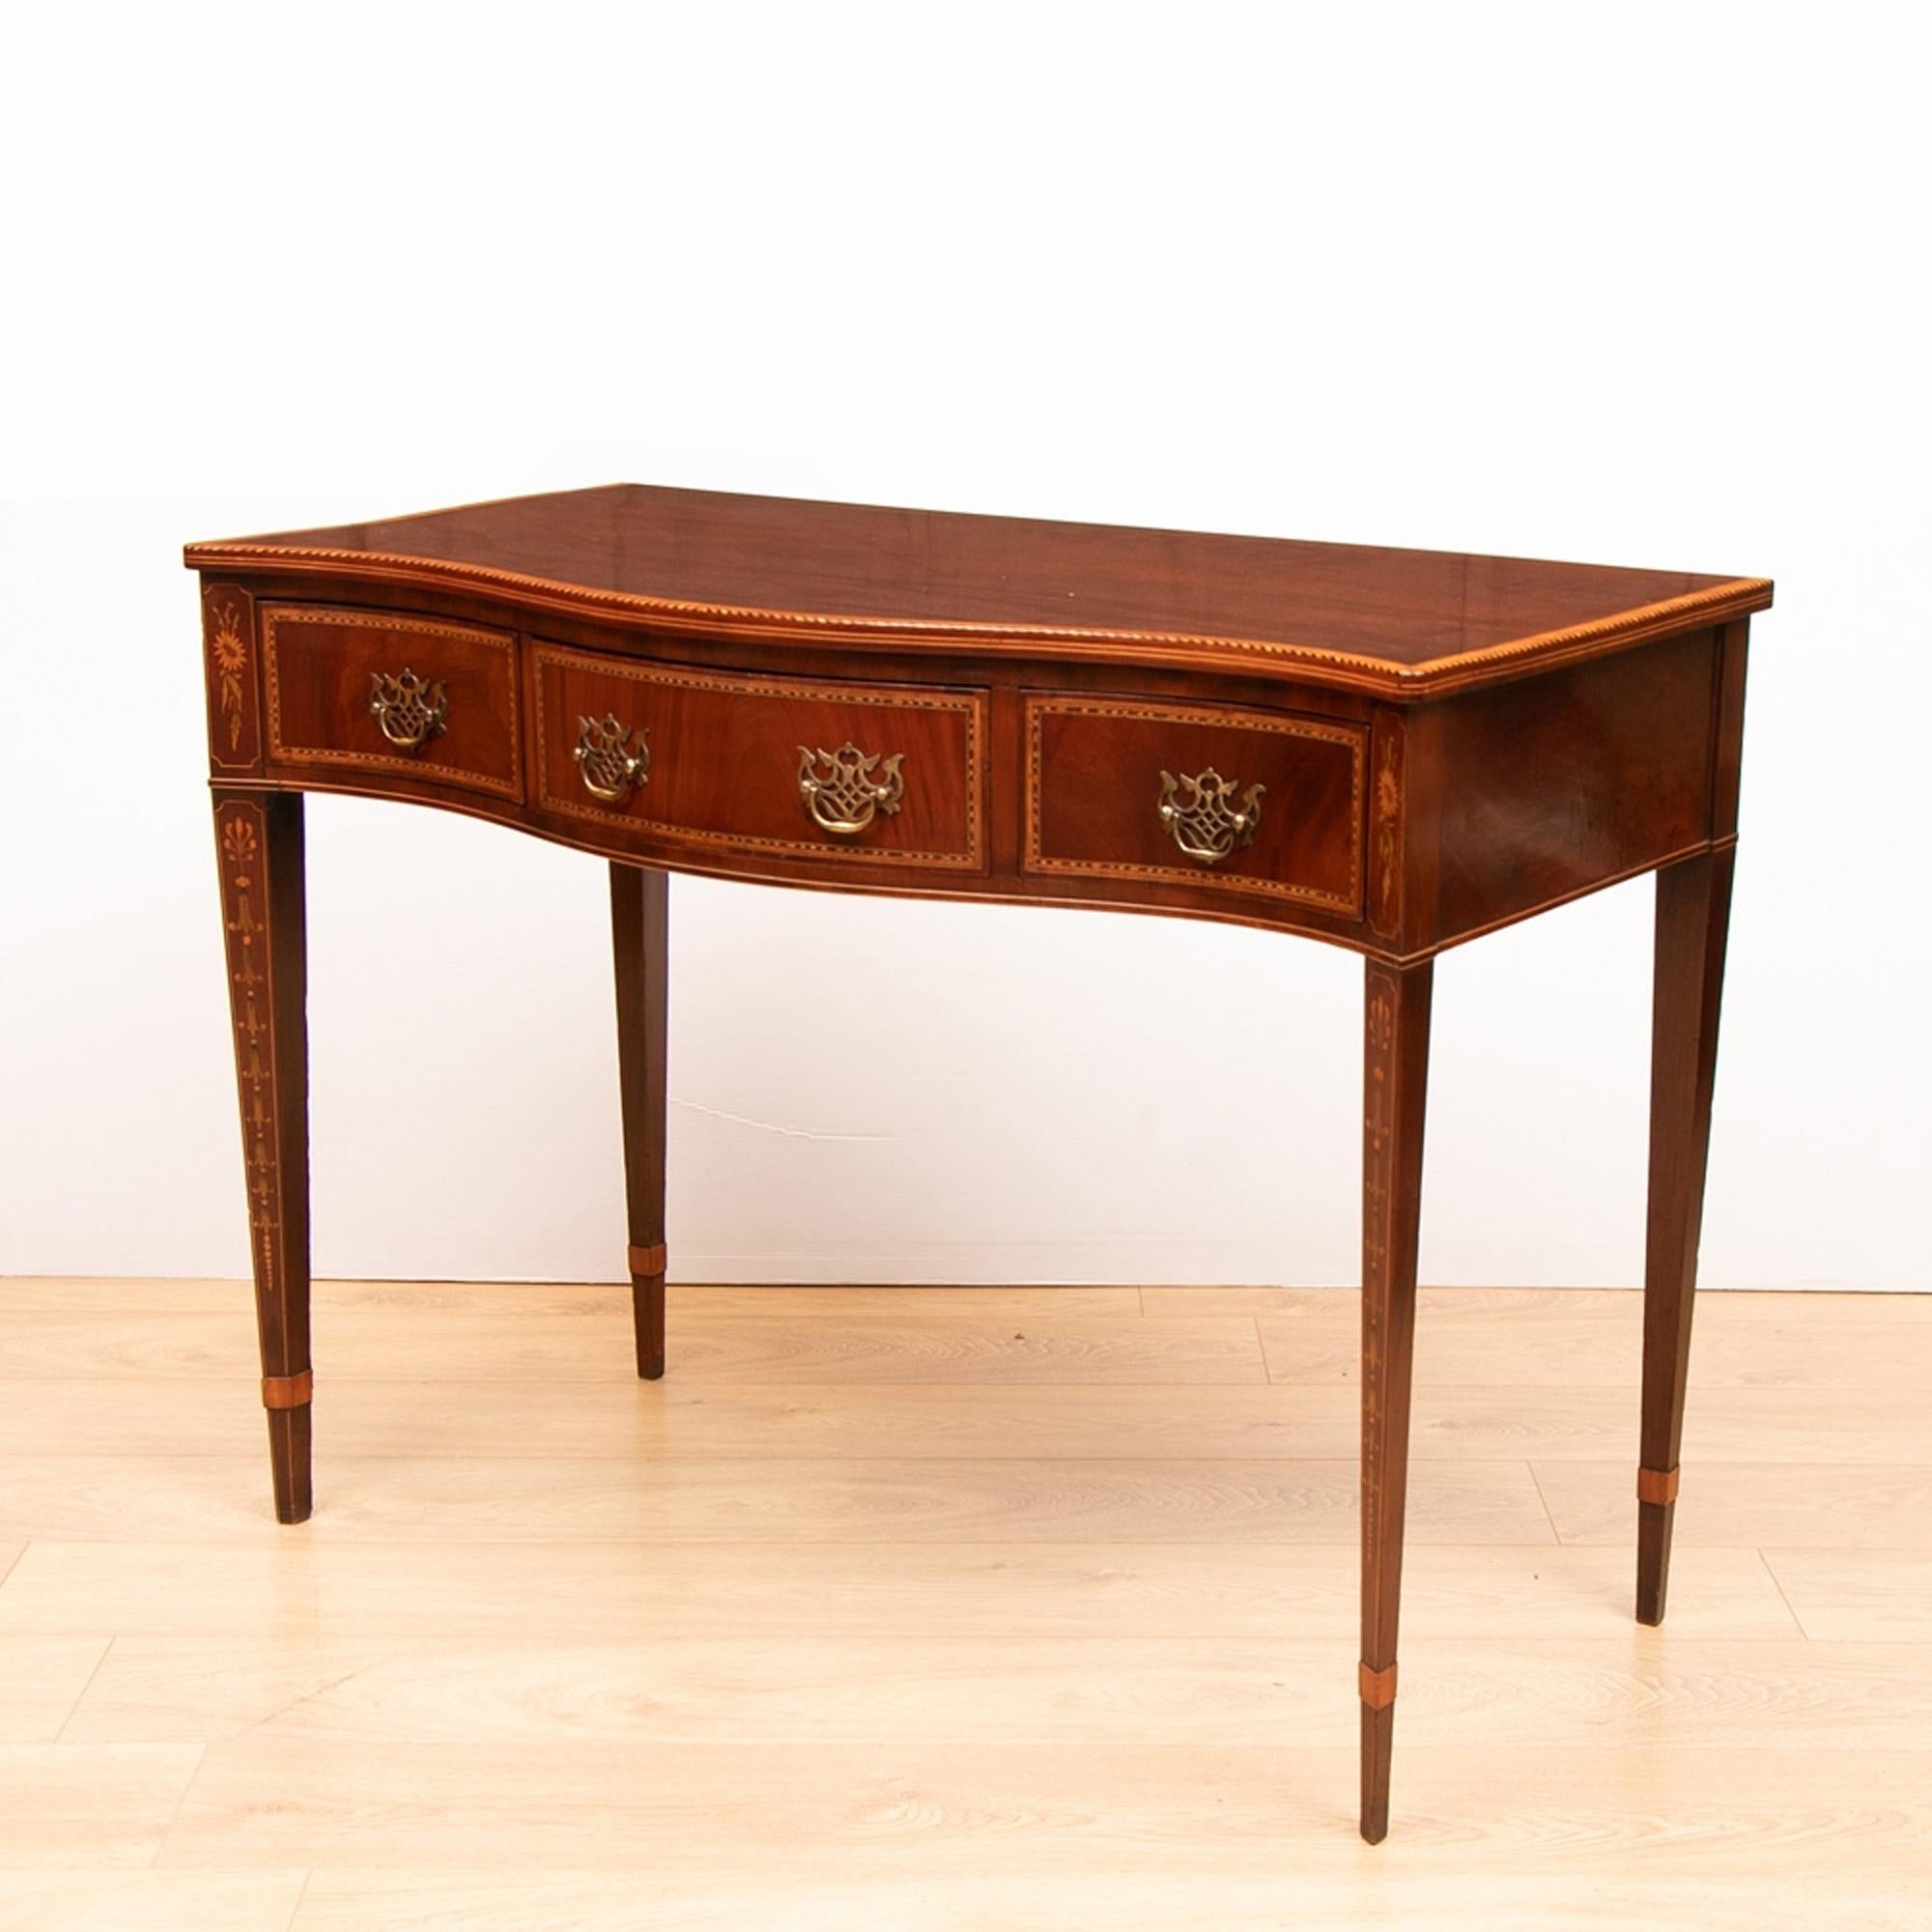 A superb quality Sheraton revival, satinwood and box wood inlaid cross banded consul table. Excellent quality solid mahogany timbers and lovely detailing including the canted inlaid tapering legs. A high quality Victorian copy which looks and stands